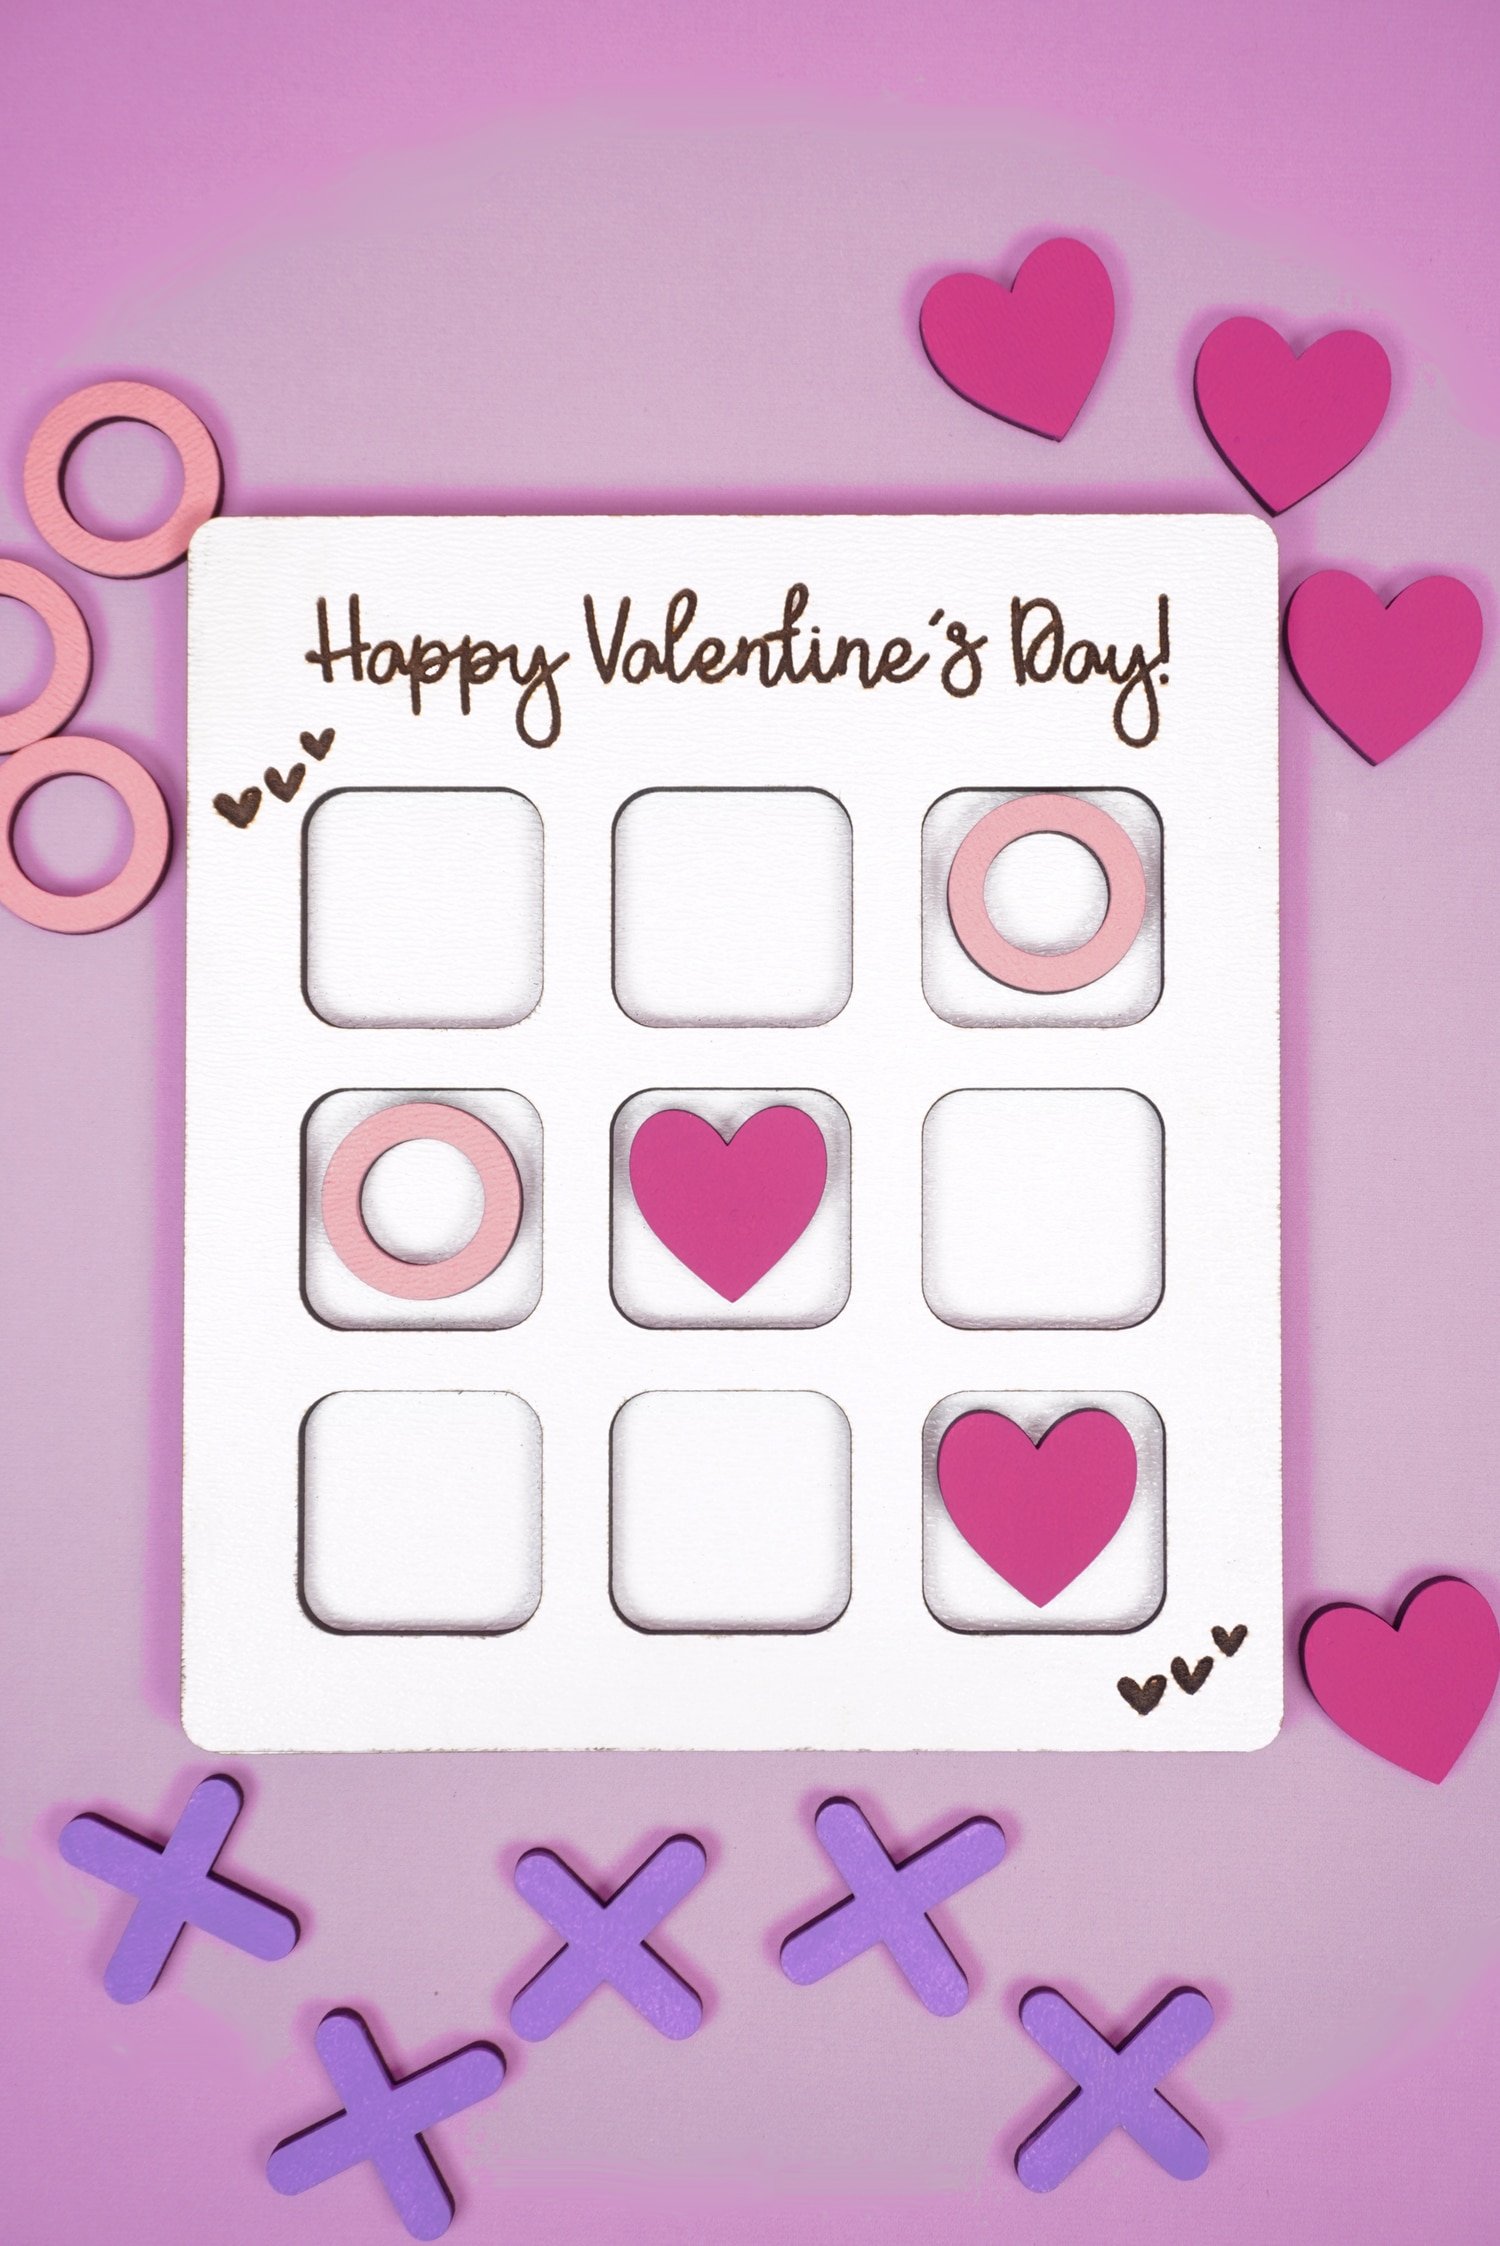 Valentine Tic Tac Toe game made with Glowforge laser SVG on a purple background with X's, O's, and pink hearts